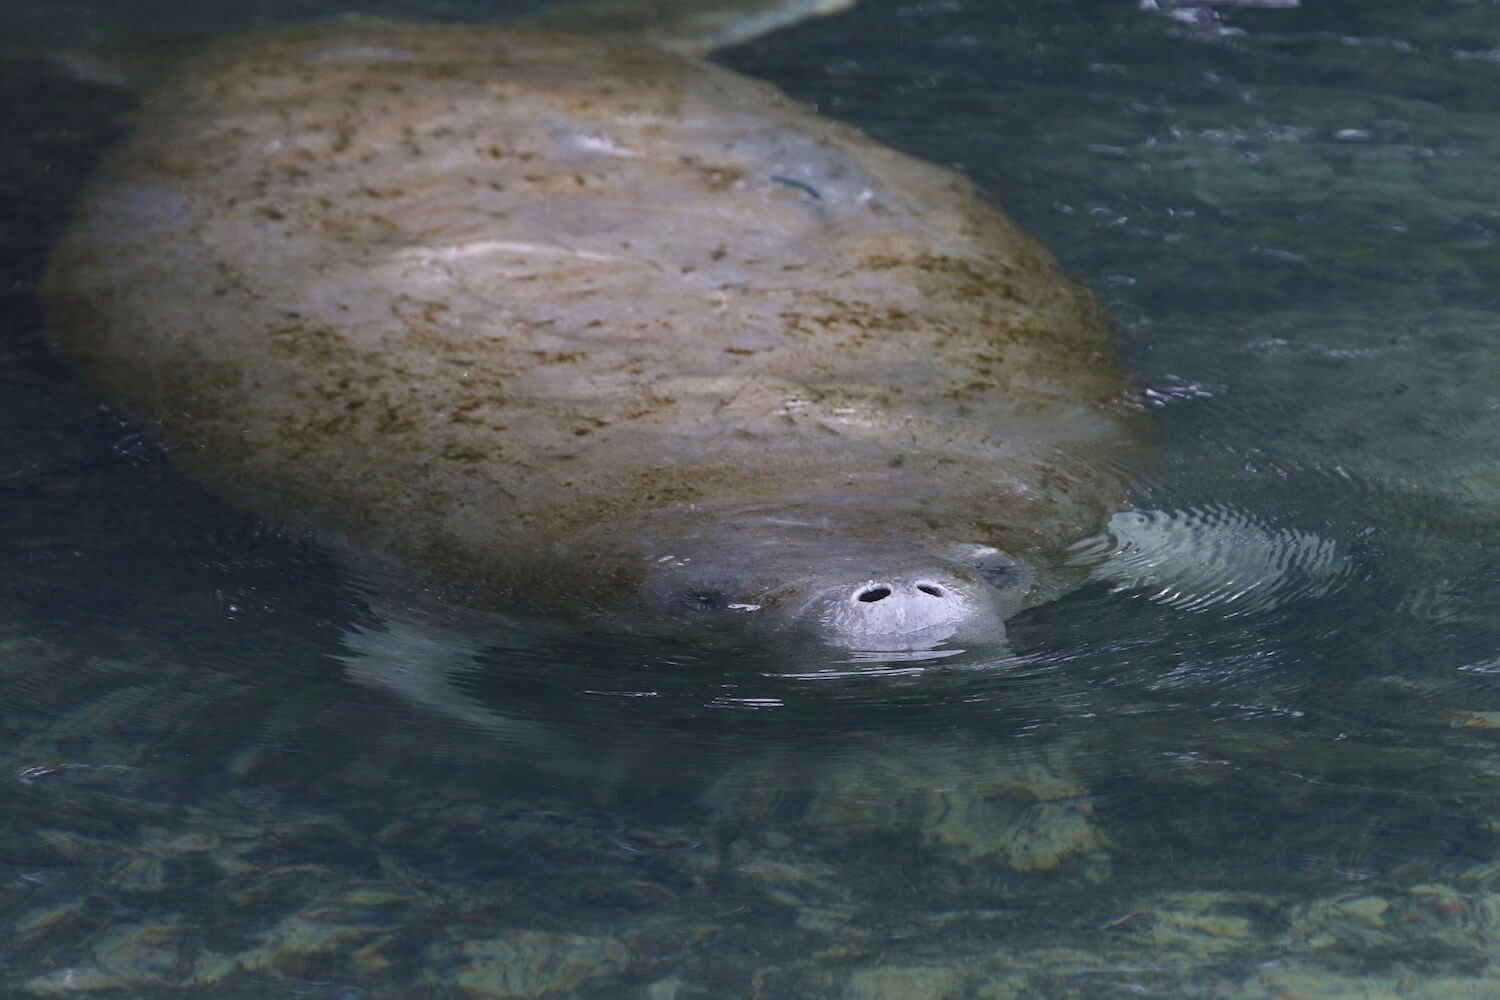 Manatee in clear water with nose sticking out.